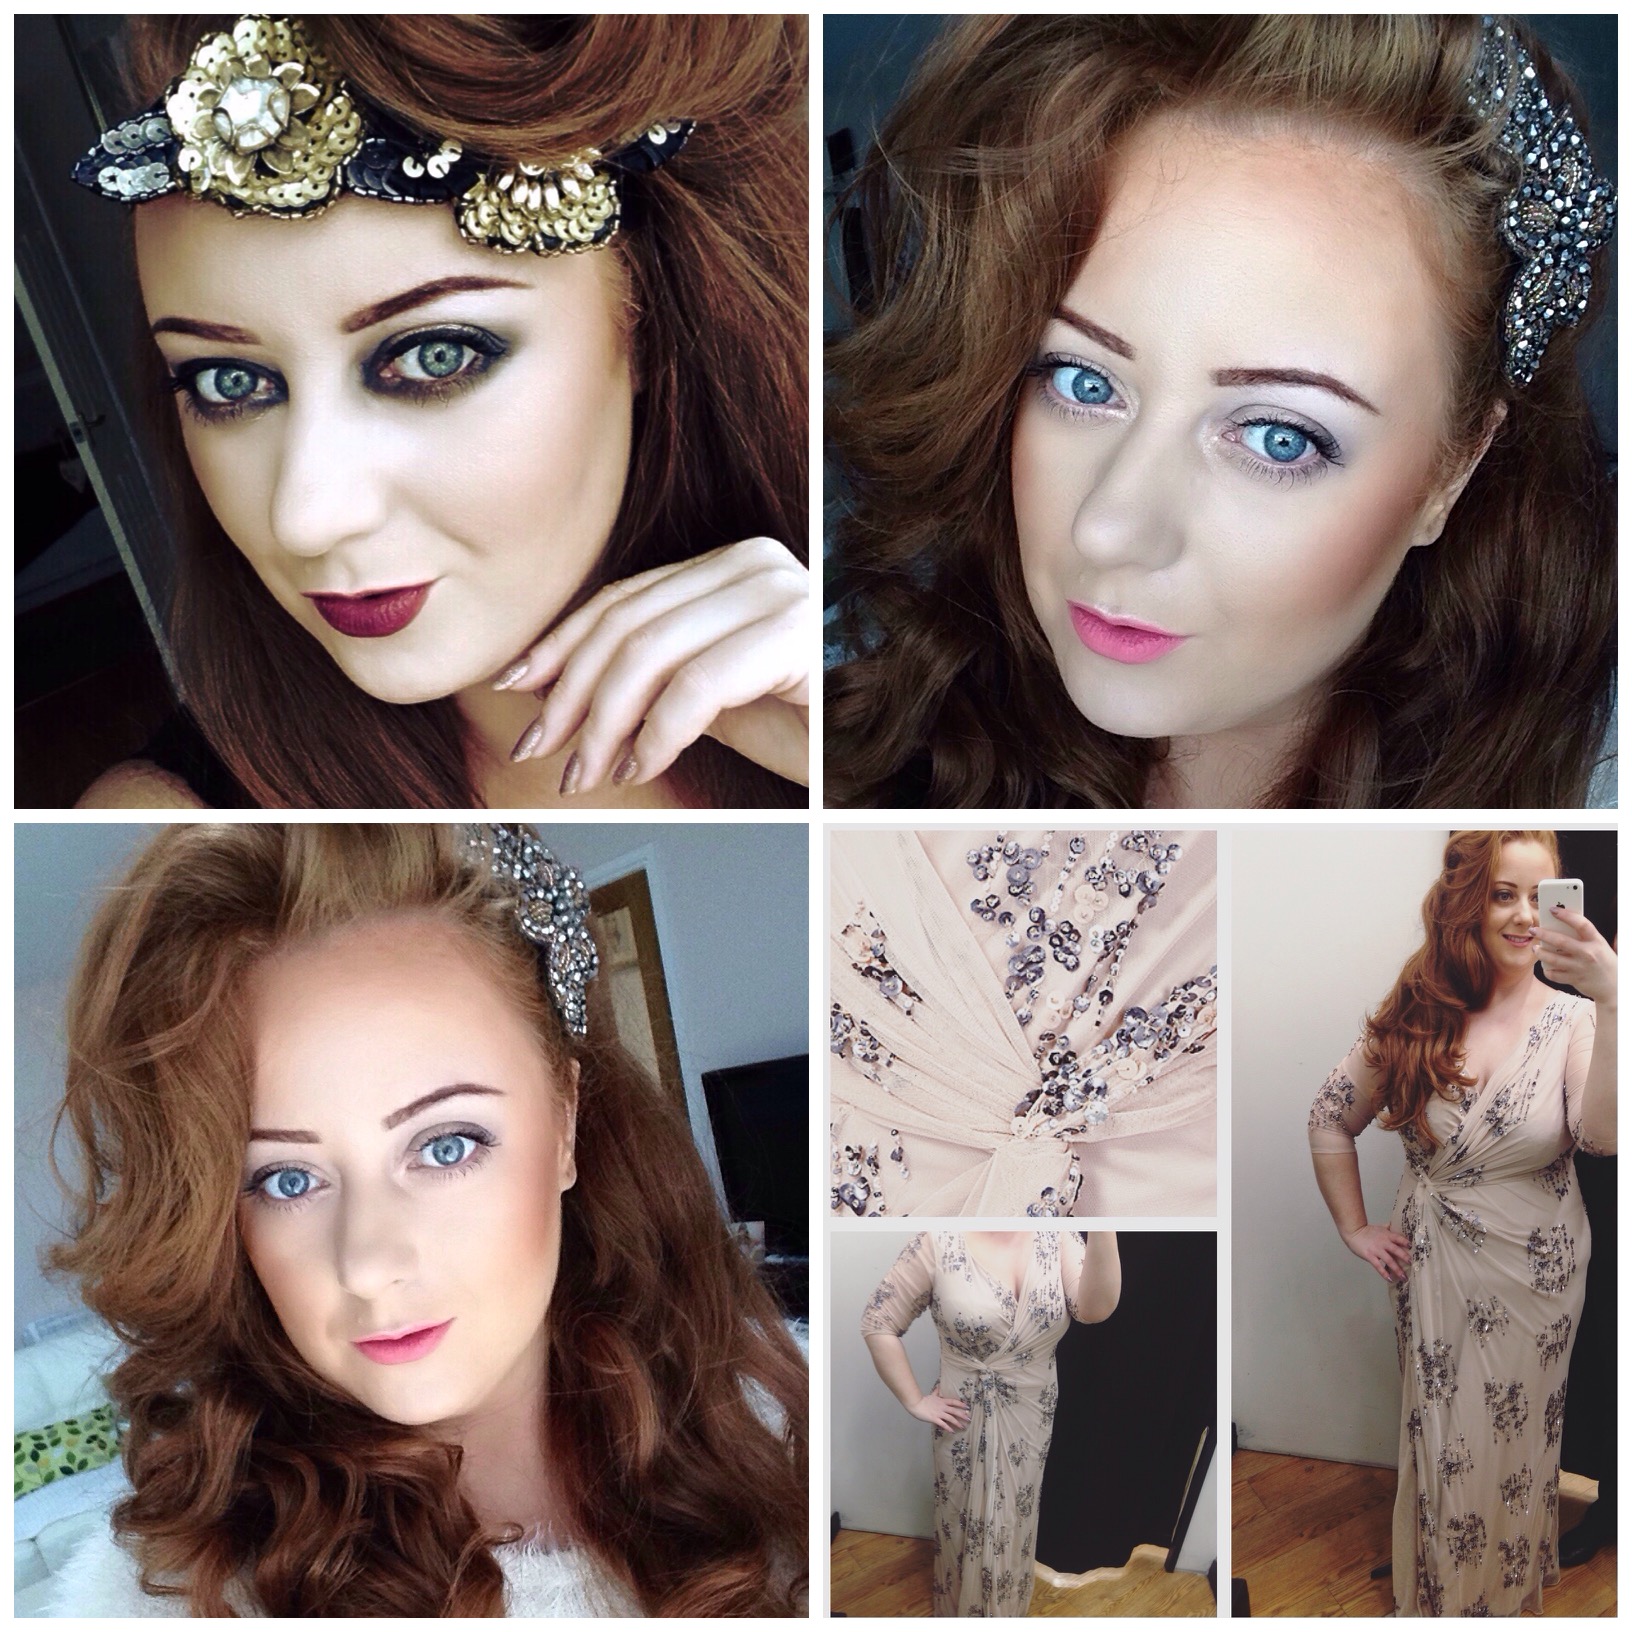 Vintage 1920 S Inspired Makeup And Hair